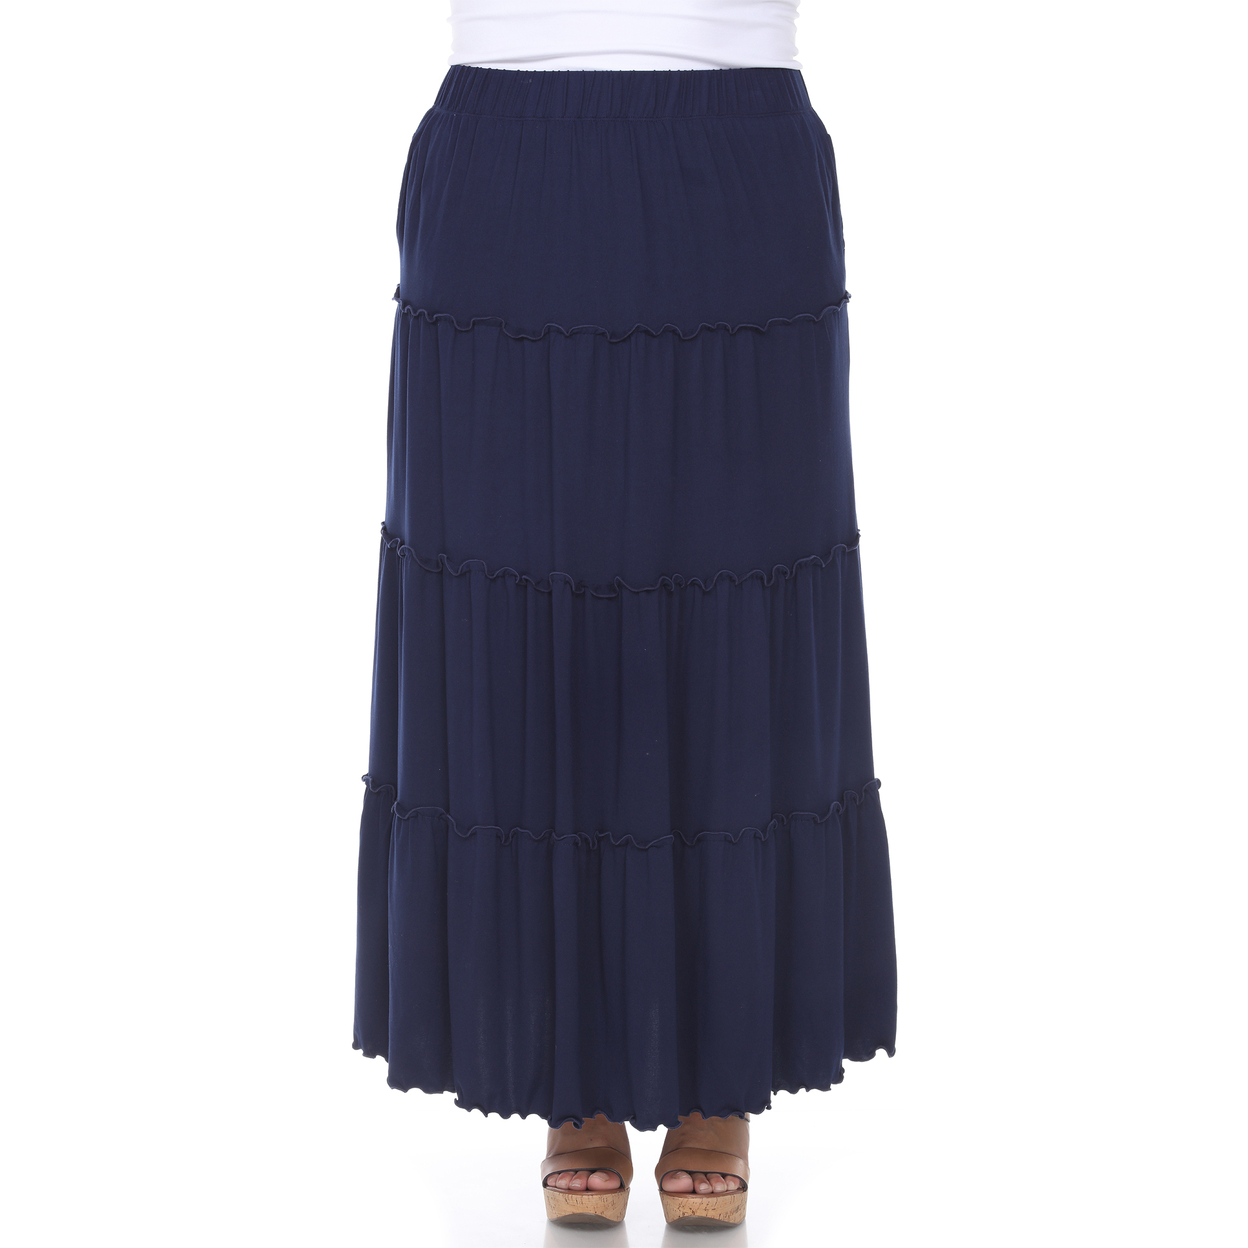 White Mark Women's Plus Size Tiered Maxi Skirt With Pockets - Denim Blue, 2x